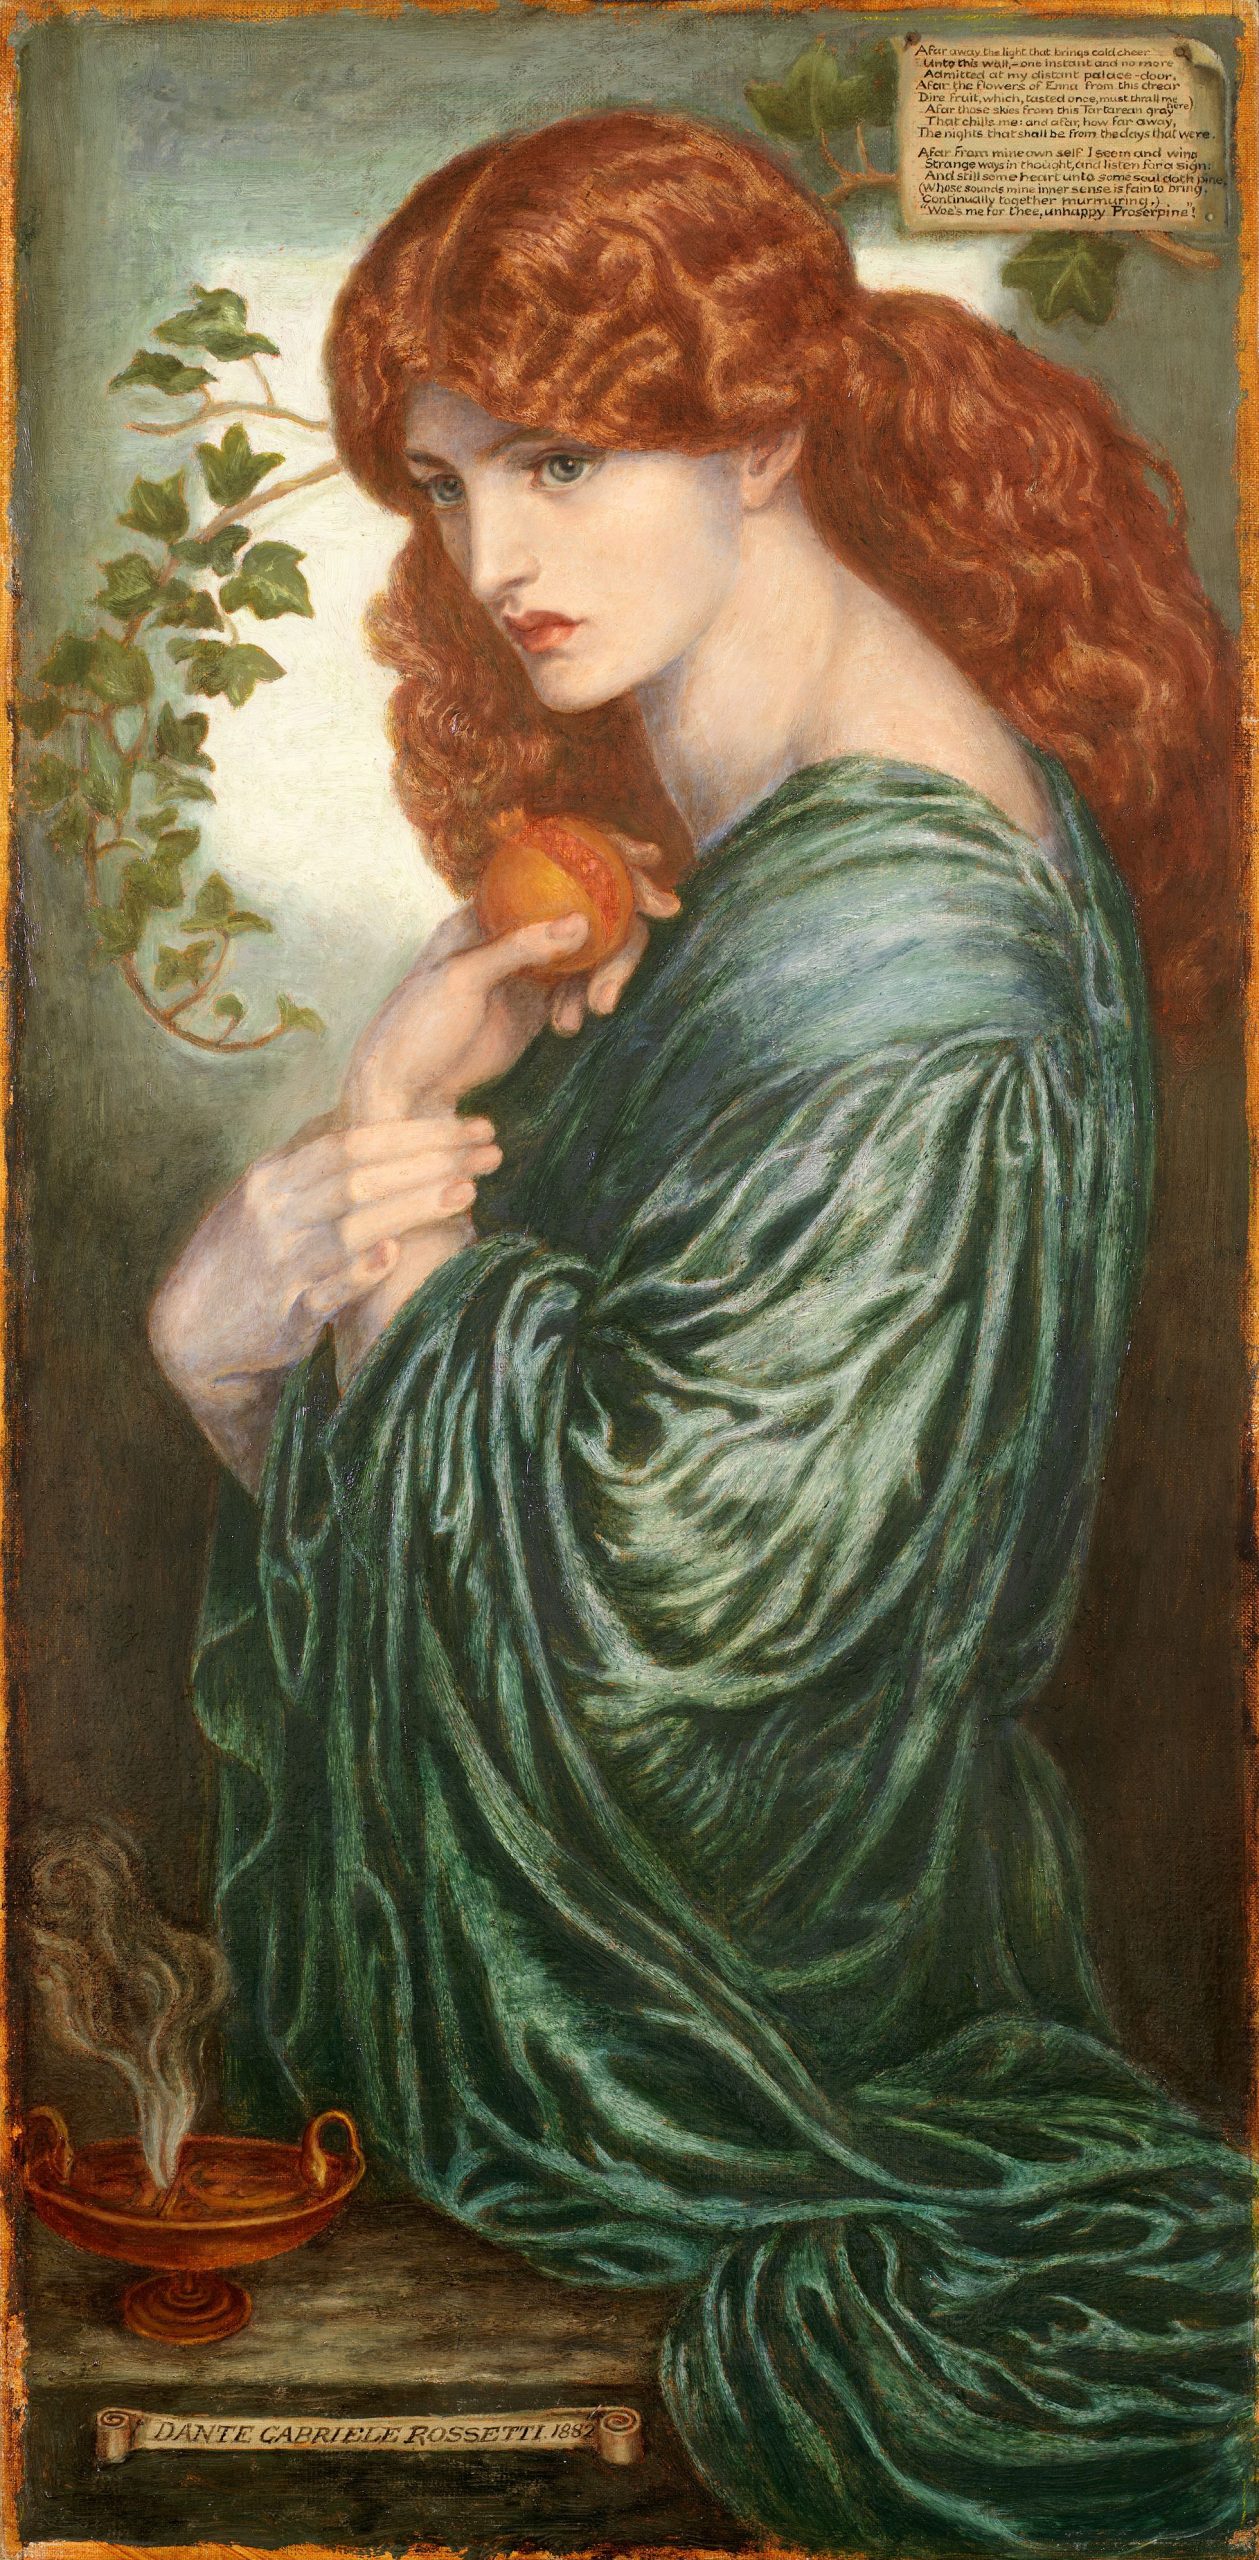 A woman holding a fruit close to her chest with vines in the background